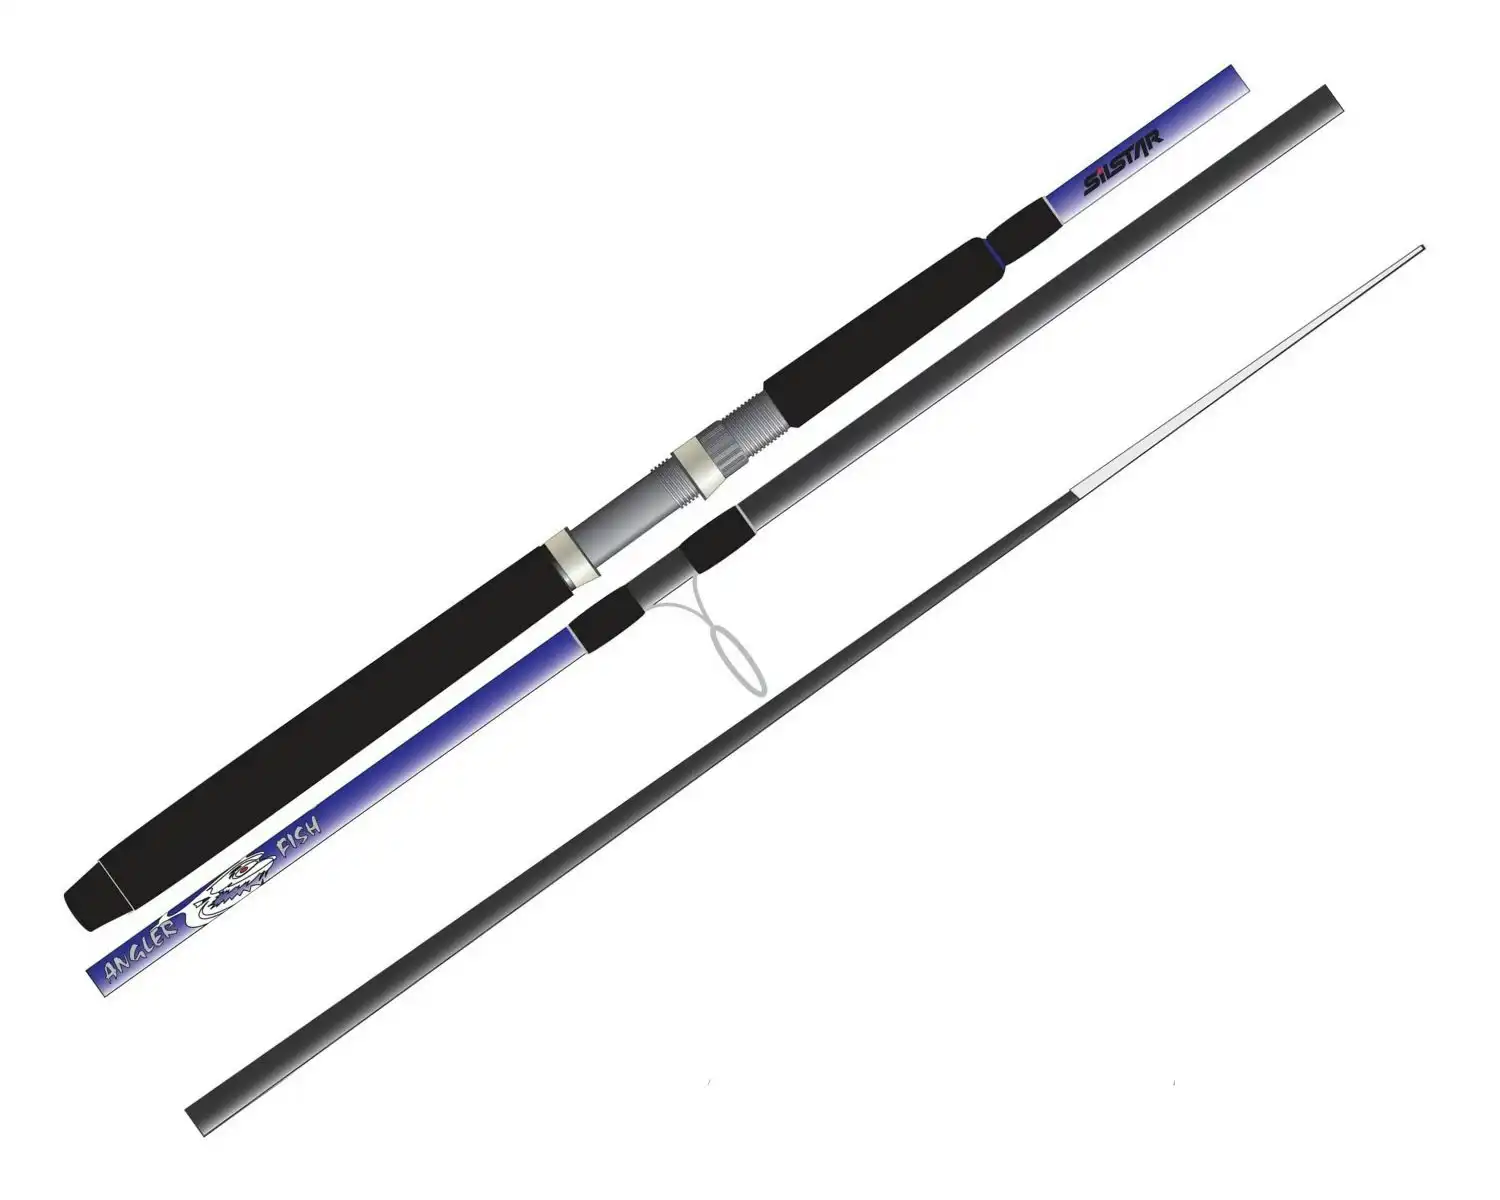 Silstar Angler Fish 2-3kg 6ft 2 Piece Fishing Rod -Spin Rod with Solid Glass Tip